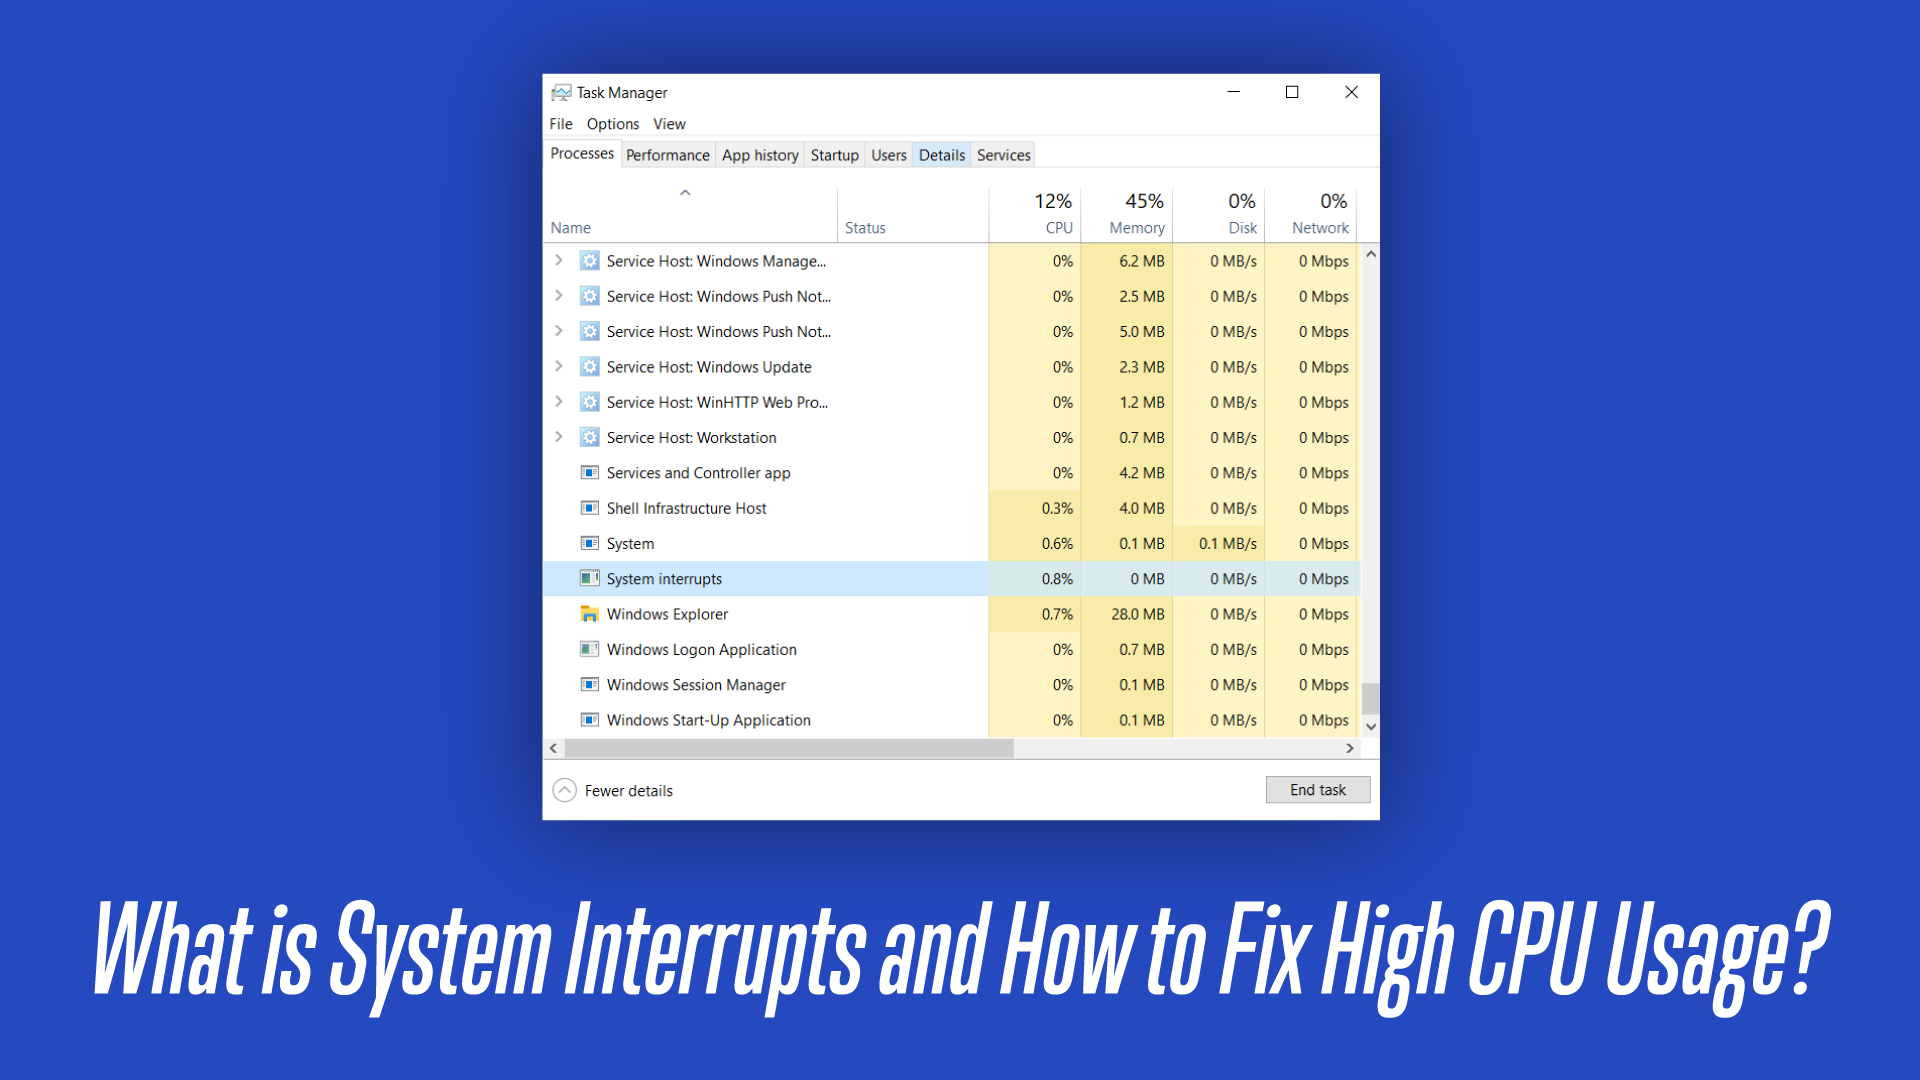 What is "System Interrupts" Process and How to Fix High CPU Usage by System Interrupts